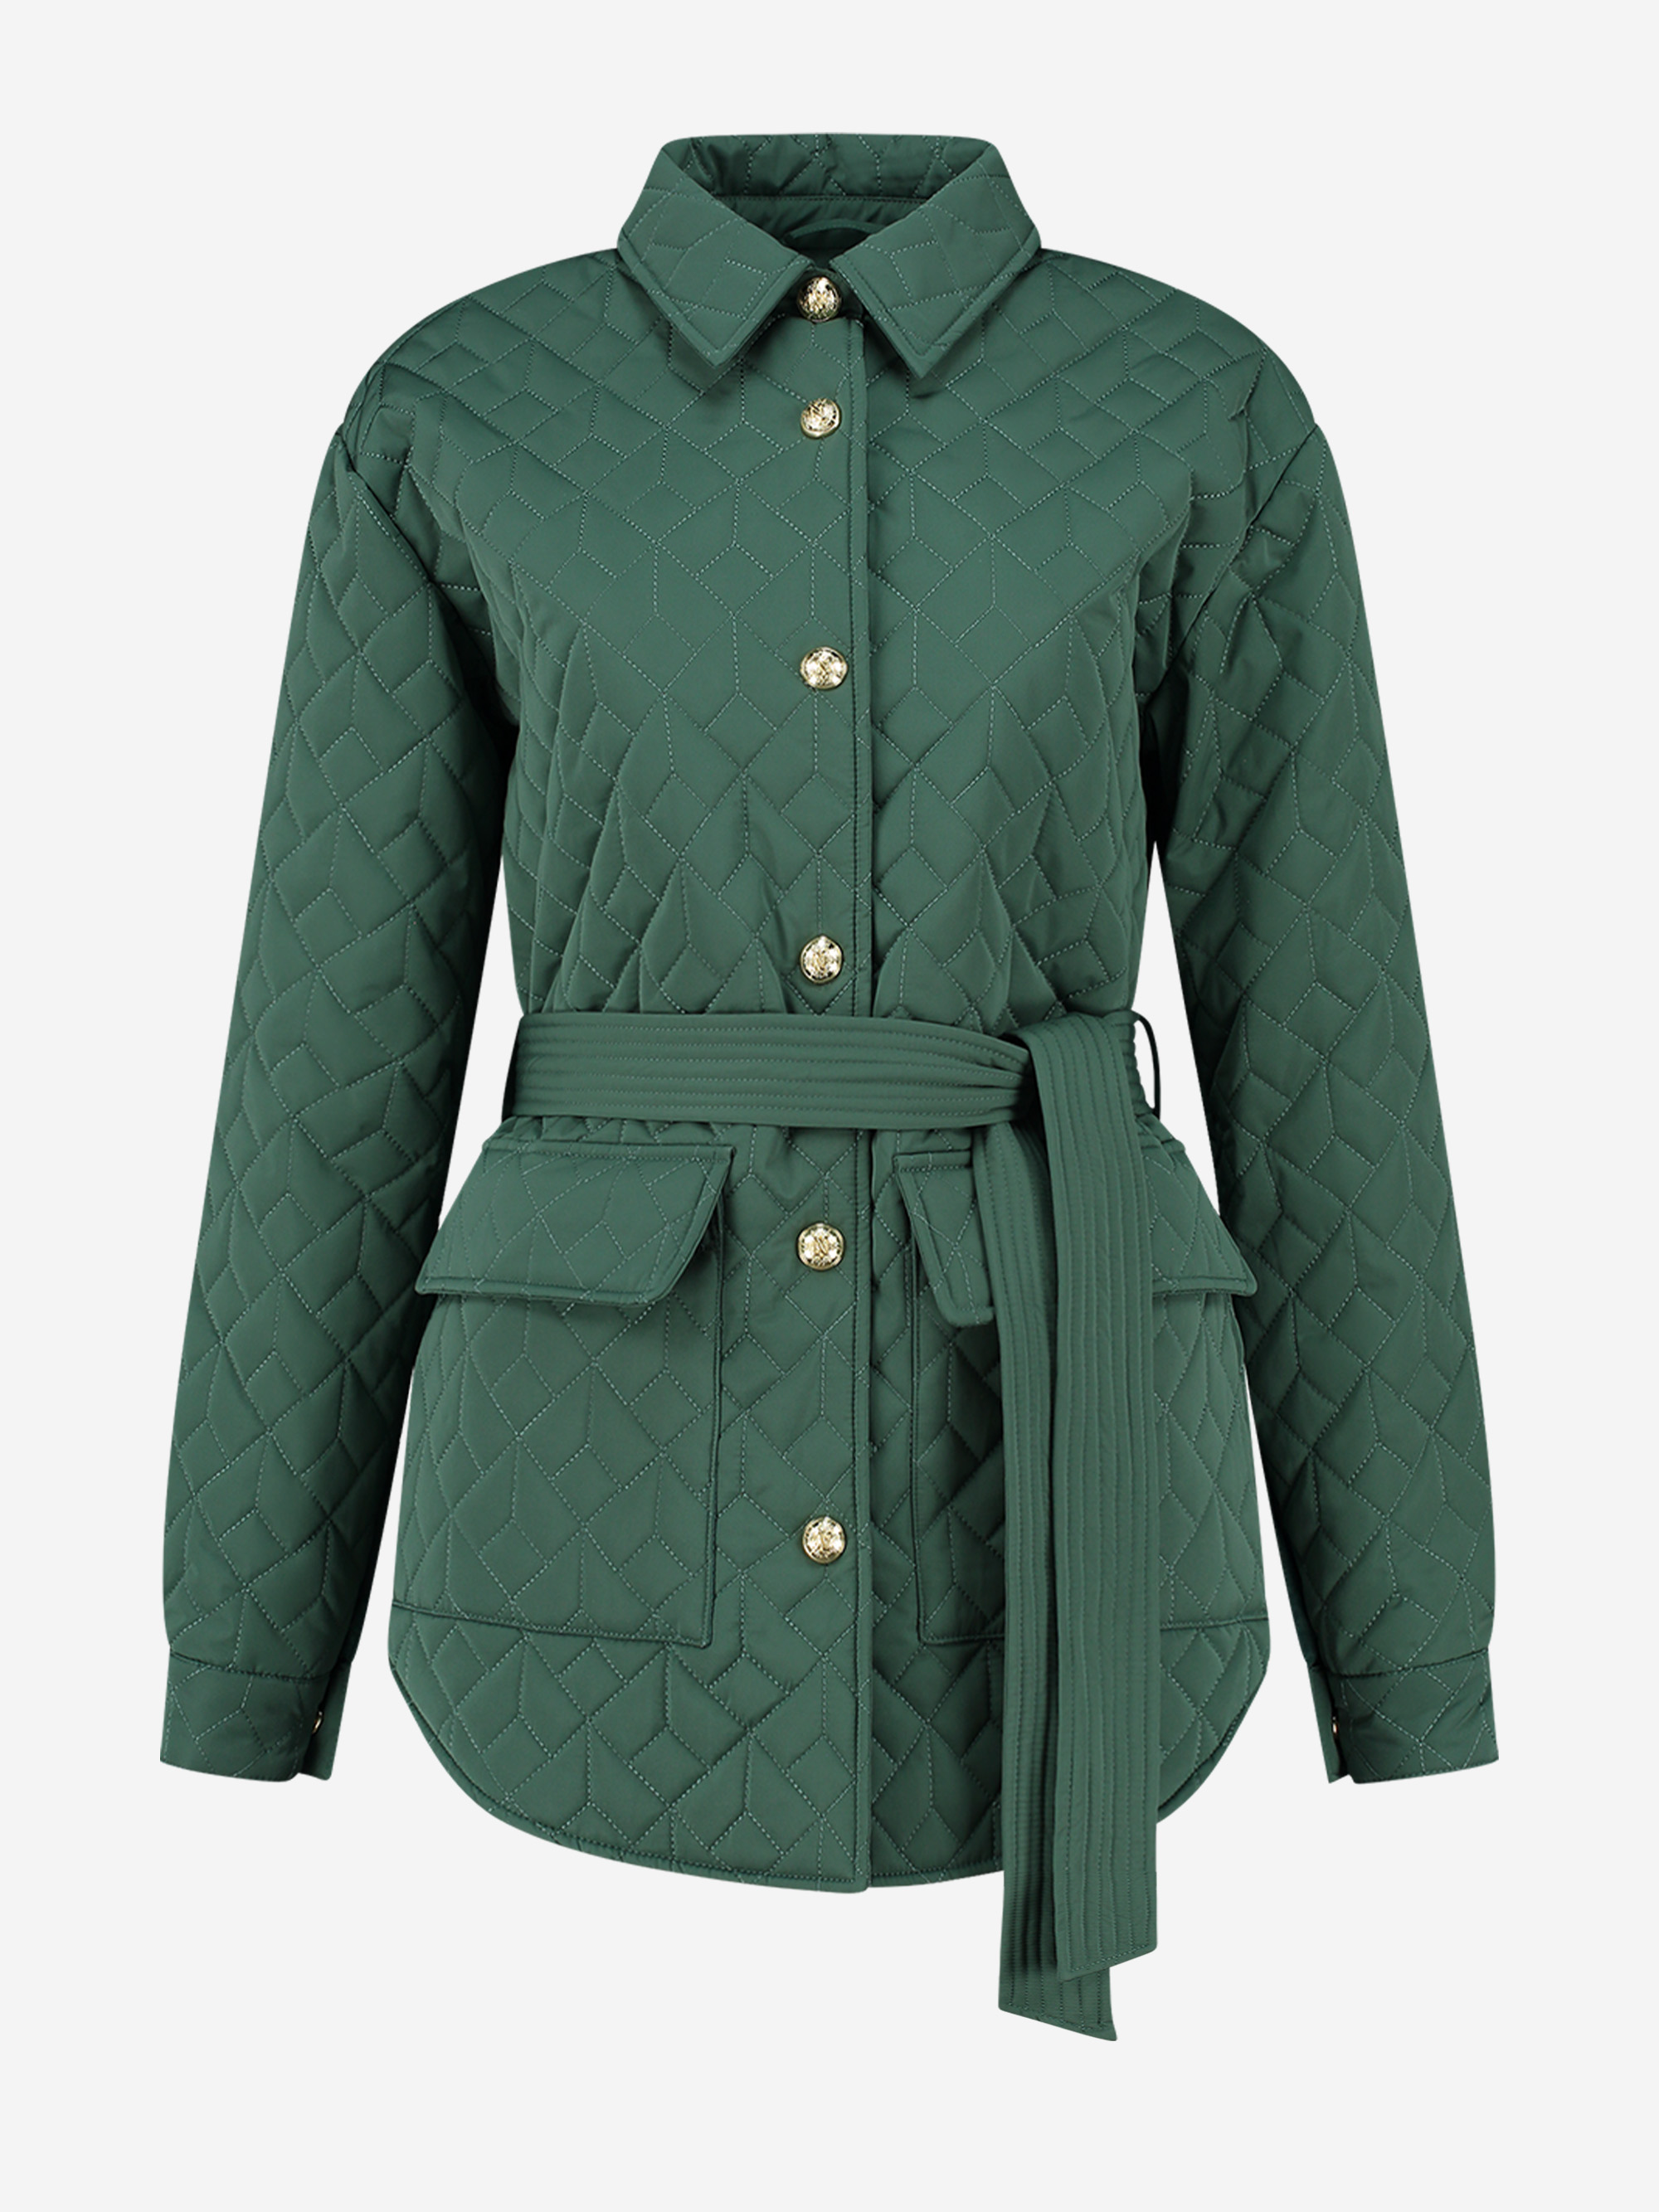  Quilted jacket with tie belt